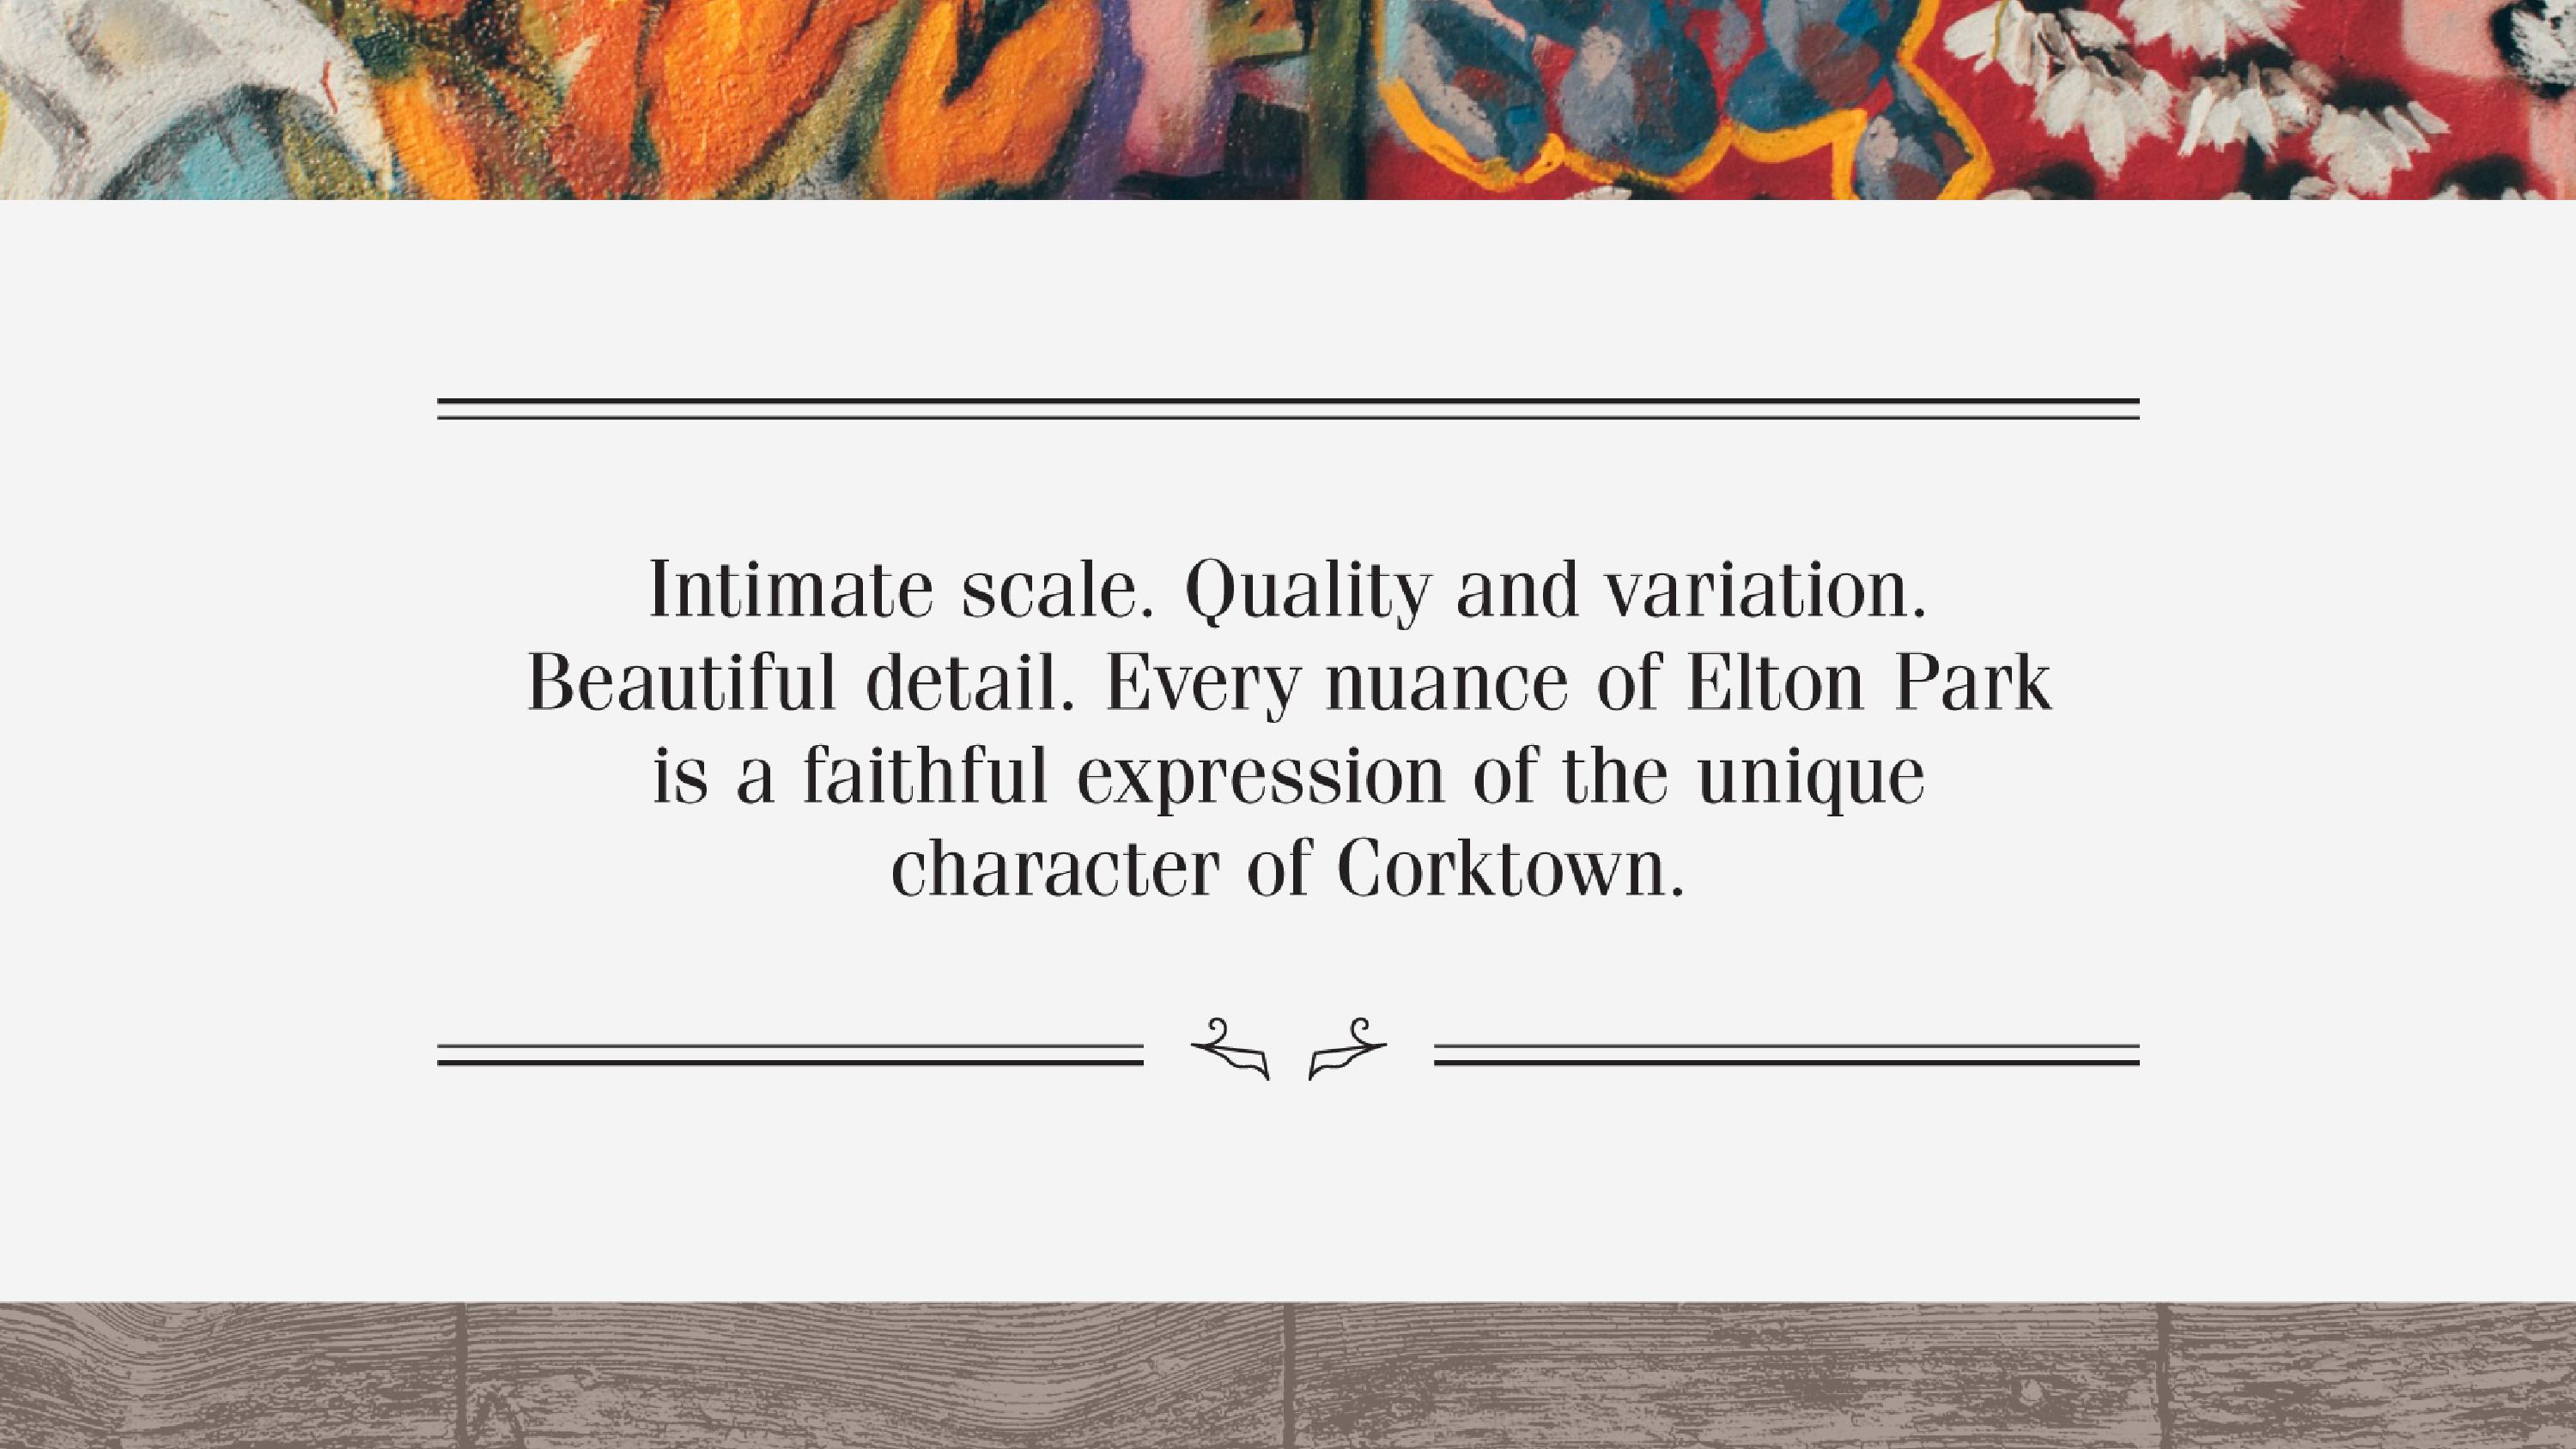 A panel from the identity guide - Intimate scale. Quality and Variation. Beautiful Detail. Every nuance of Elton Park is a faithful expression of the unique character of Corktown.